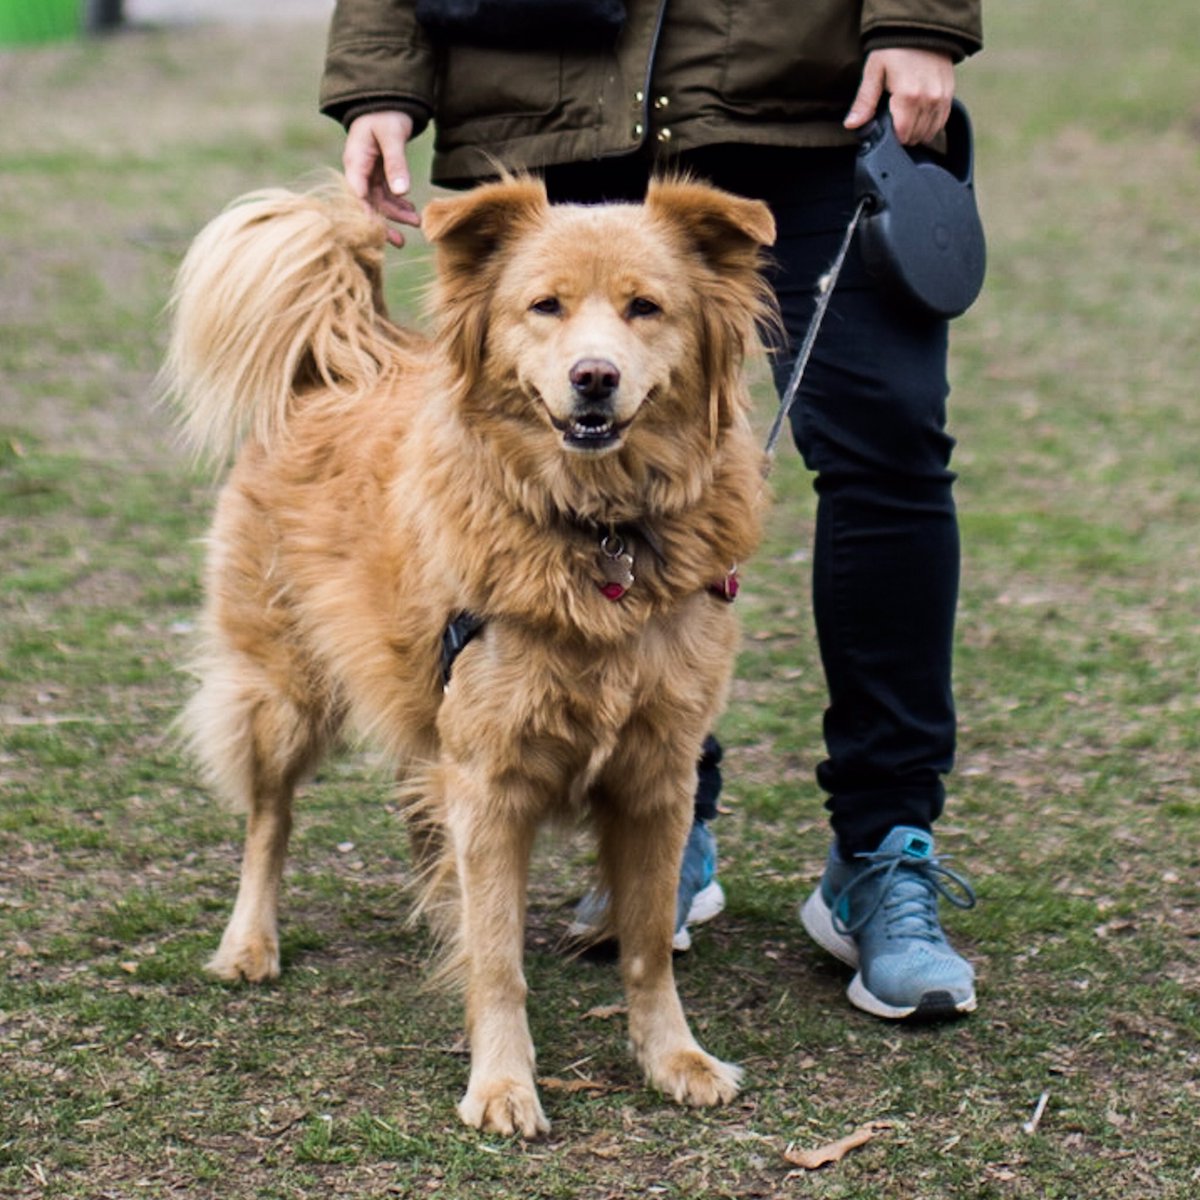 The Dogist On Twitter Summer Chow Chow Golden Retriever Mix 8 Y O Central Park Nyc She Knows How To High Five And Is A Hunter She Ll Chase Anything Https T Co Prwufk5jat